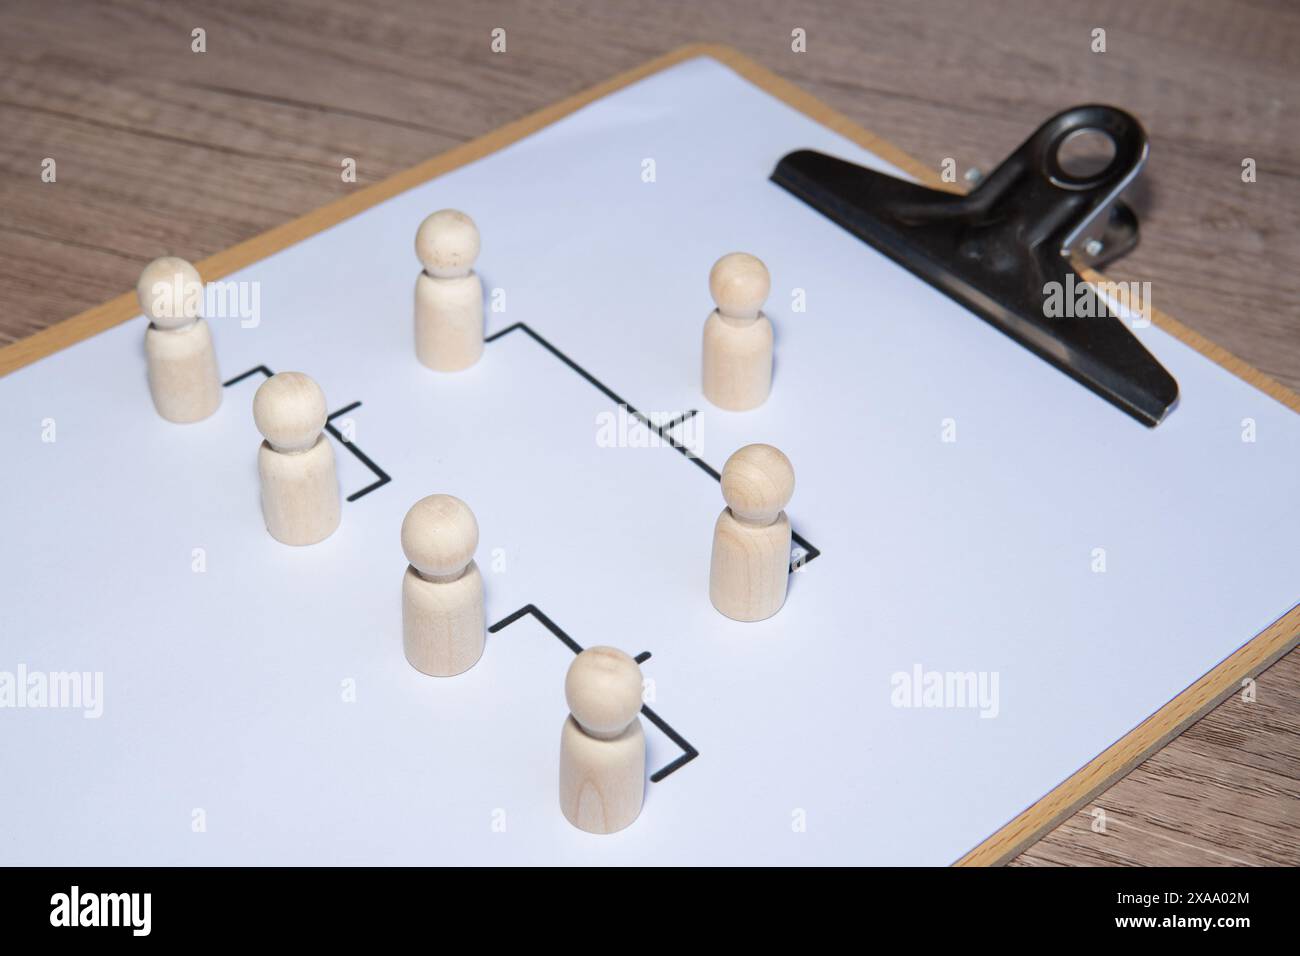 Company hierarchical organizational chart using wooden dolls. Stock Photo